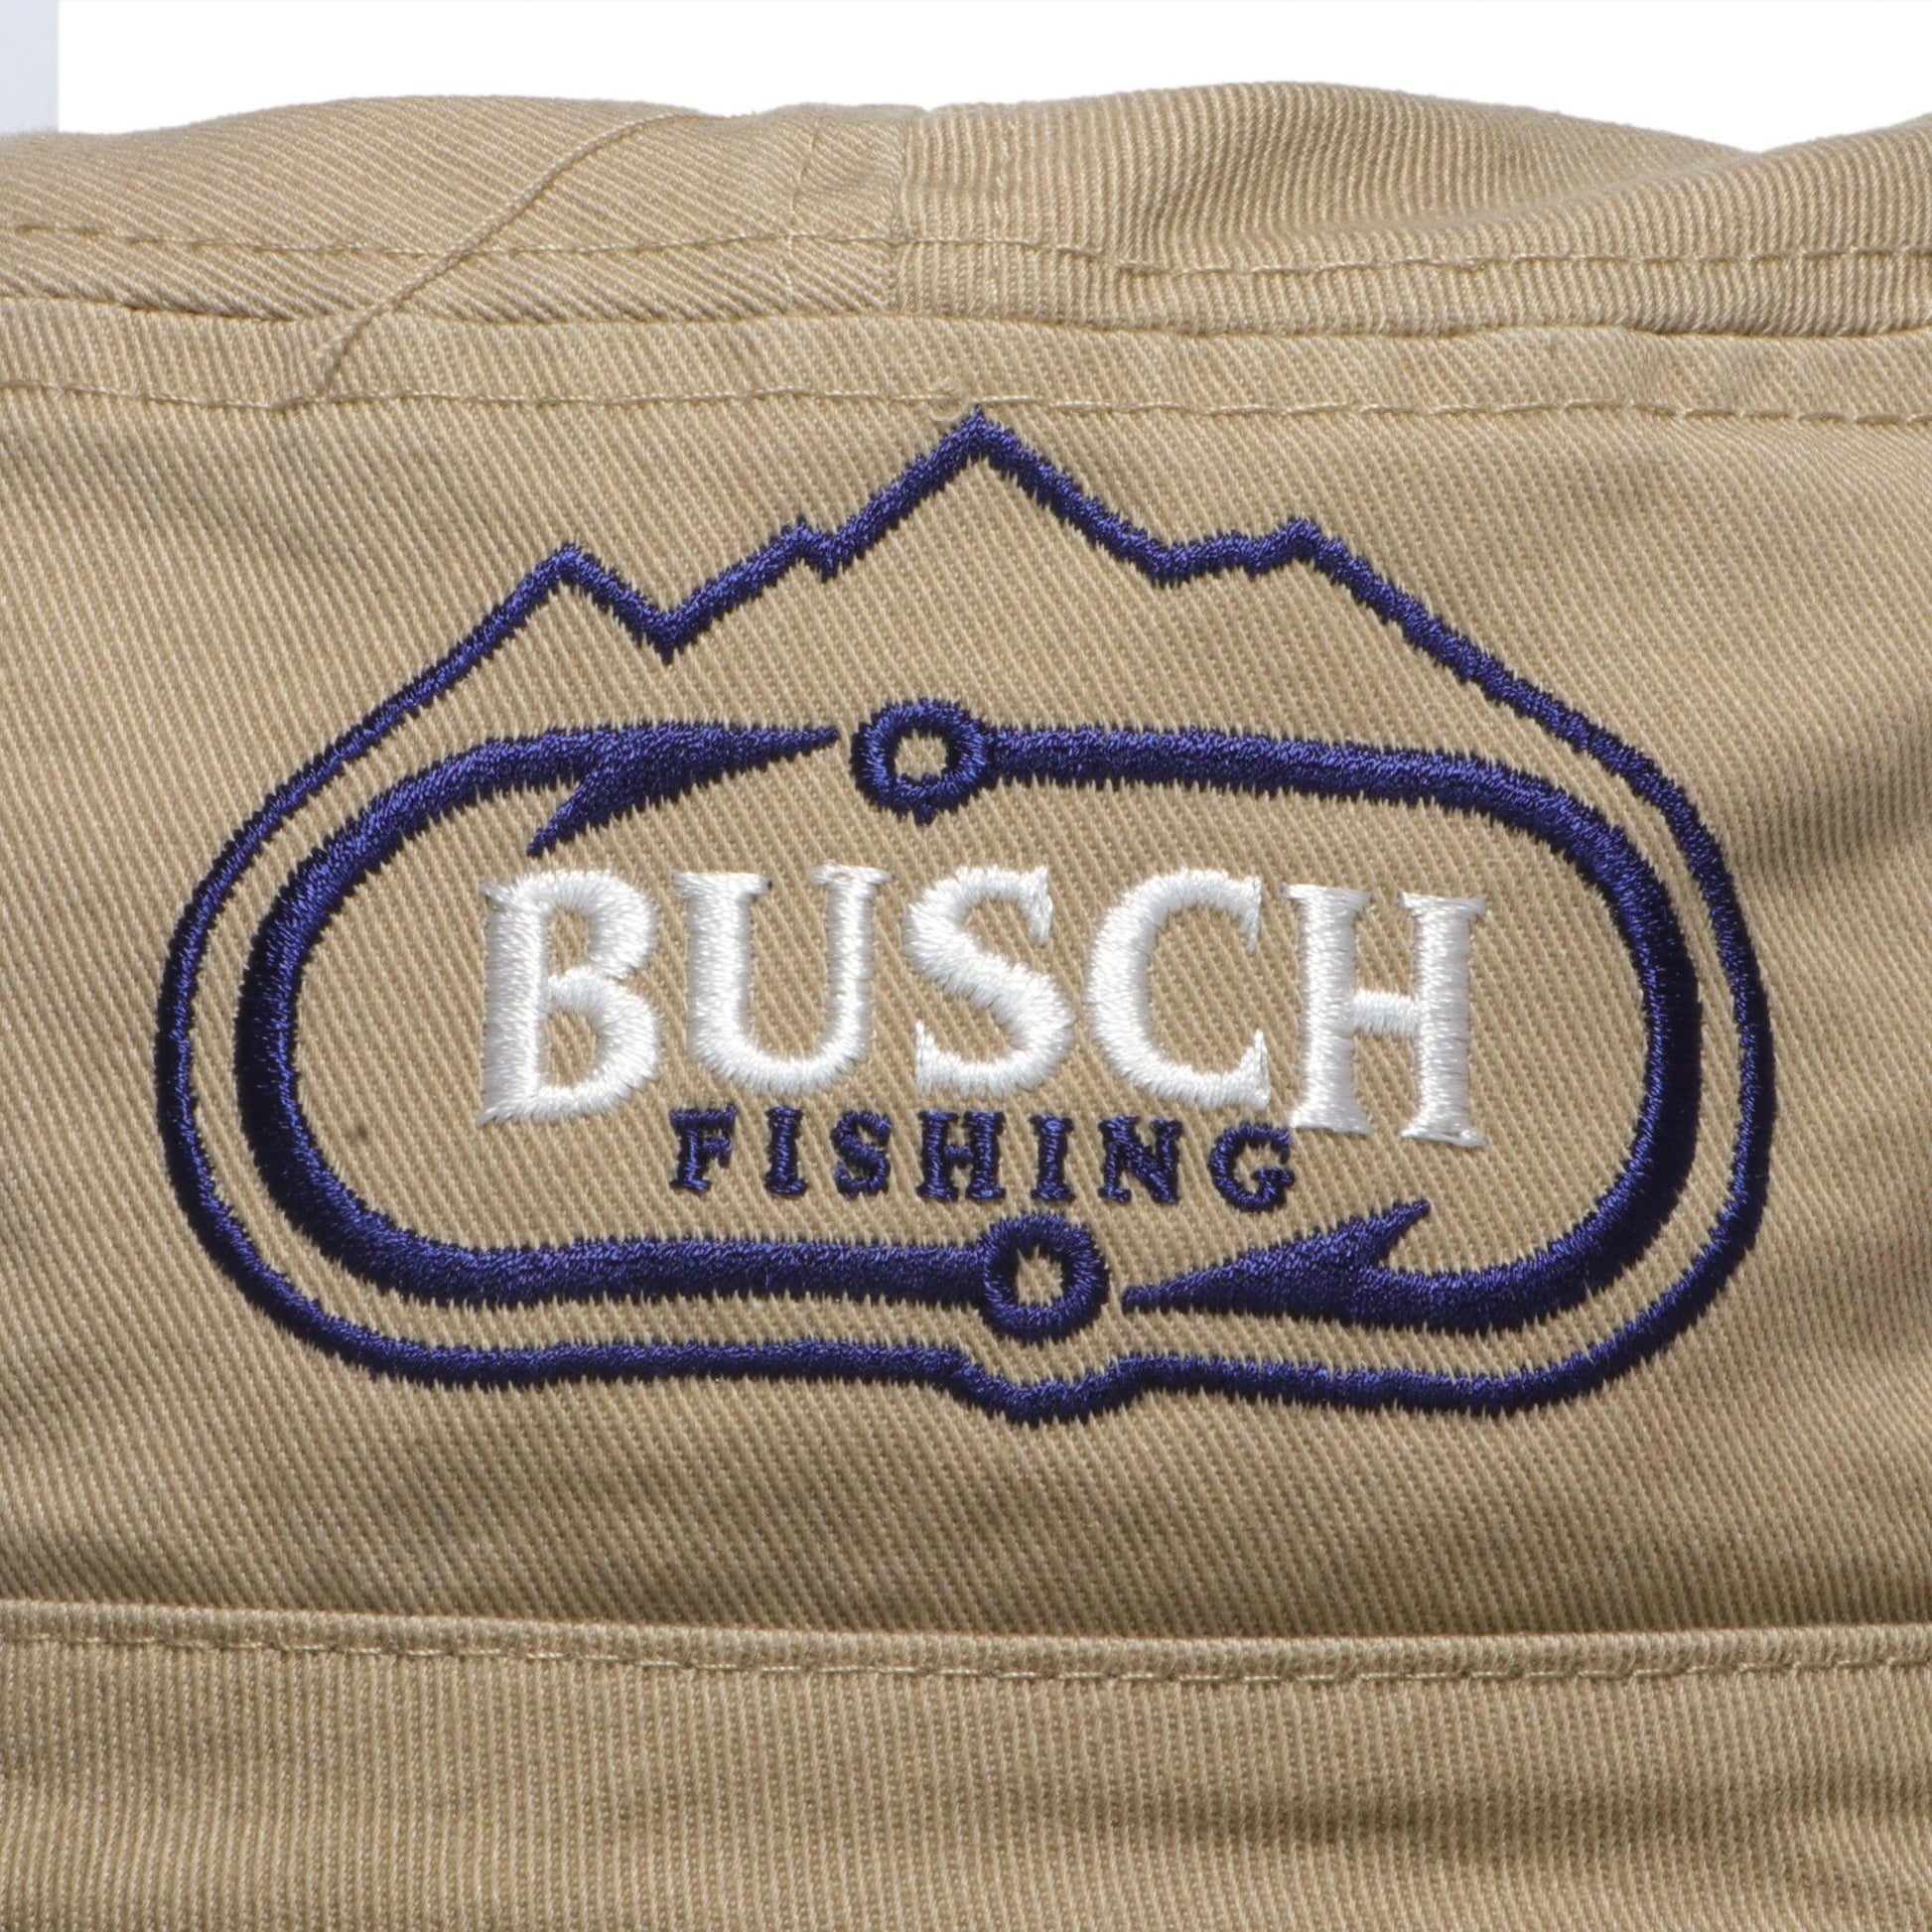 close up of embroidered Busch Fishing with hook logo